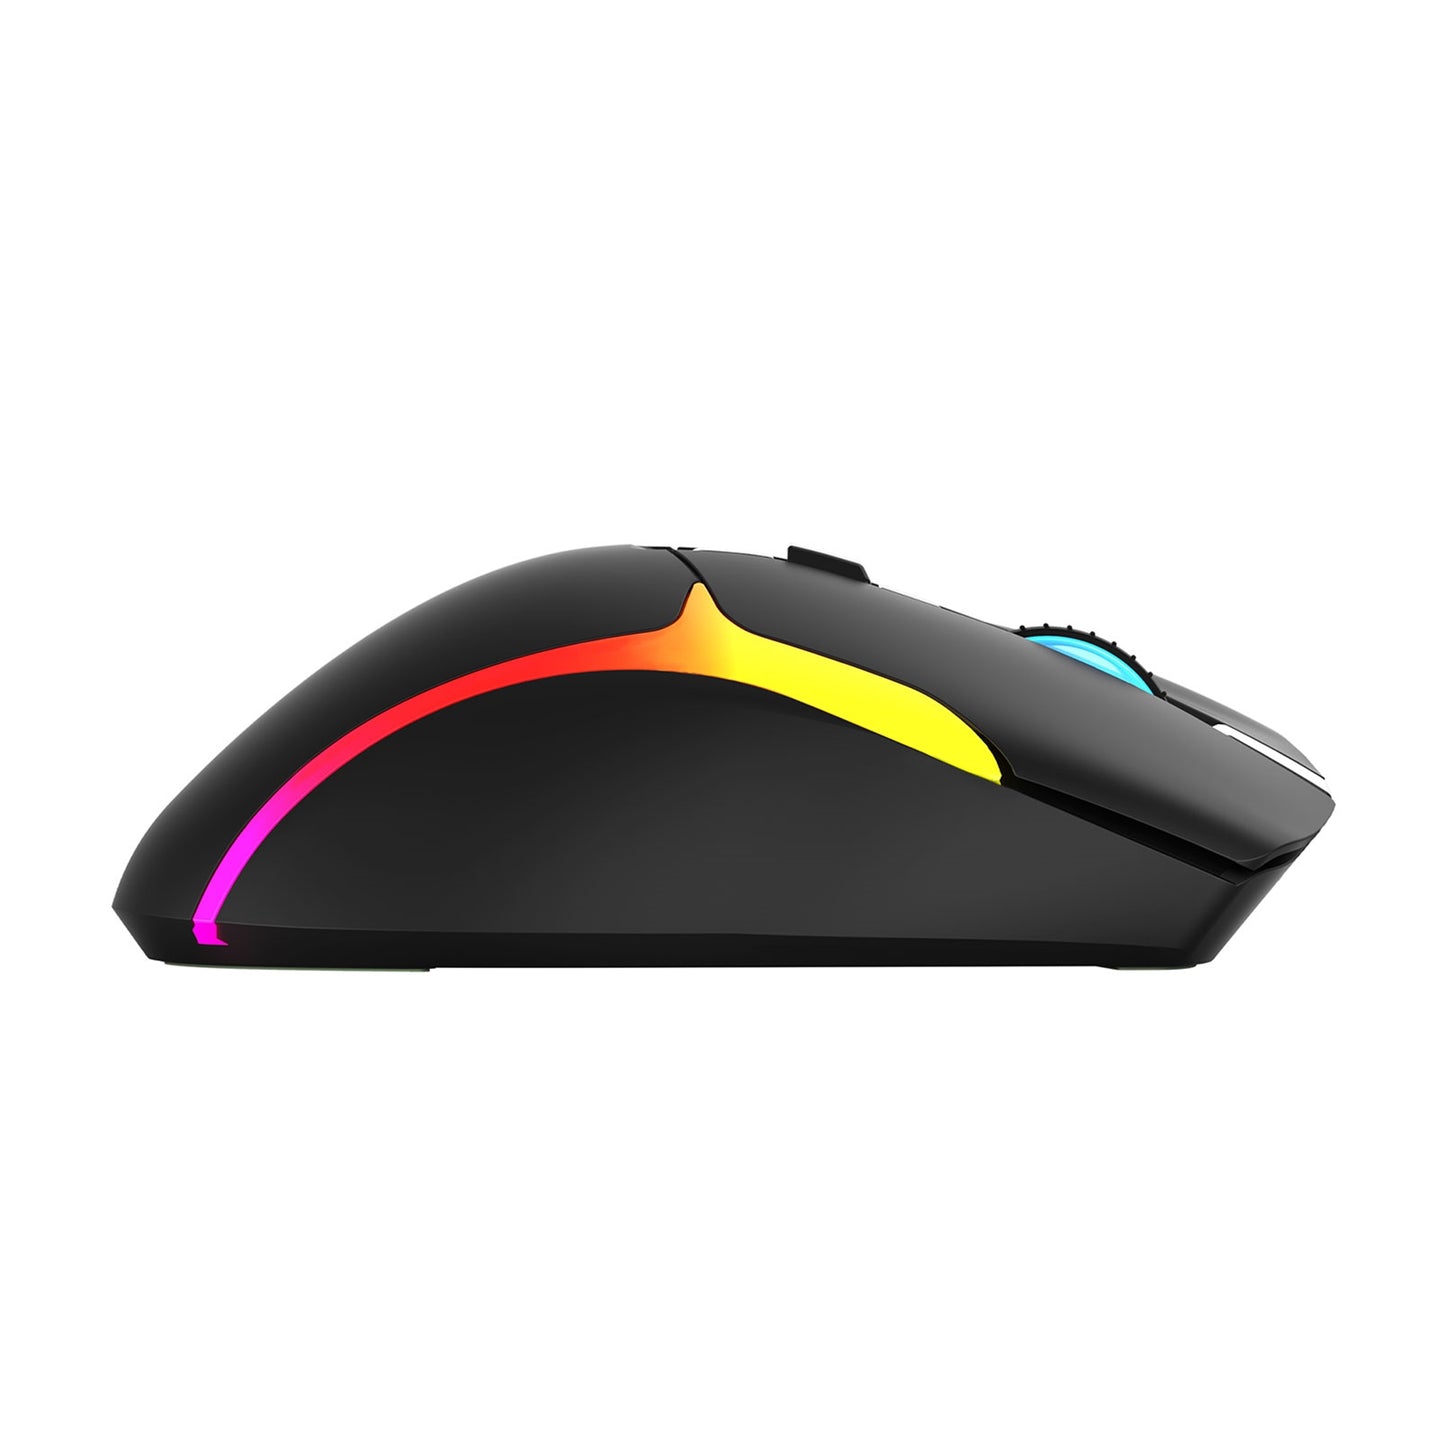 Marvo Scorpion M729W Wireless Gaming Mouse, Rechargeable, RGB with 7 Lighting Modes, 6 adjustable levels up to 4800 dpi, Gaming Grade Optical Sensor with 7 Buttons, Black